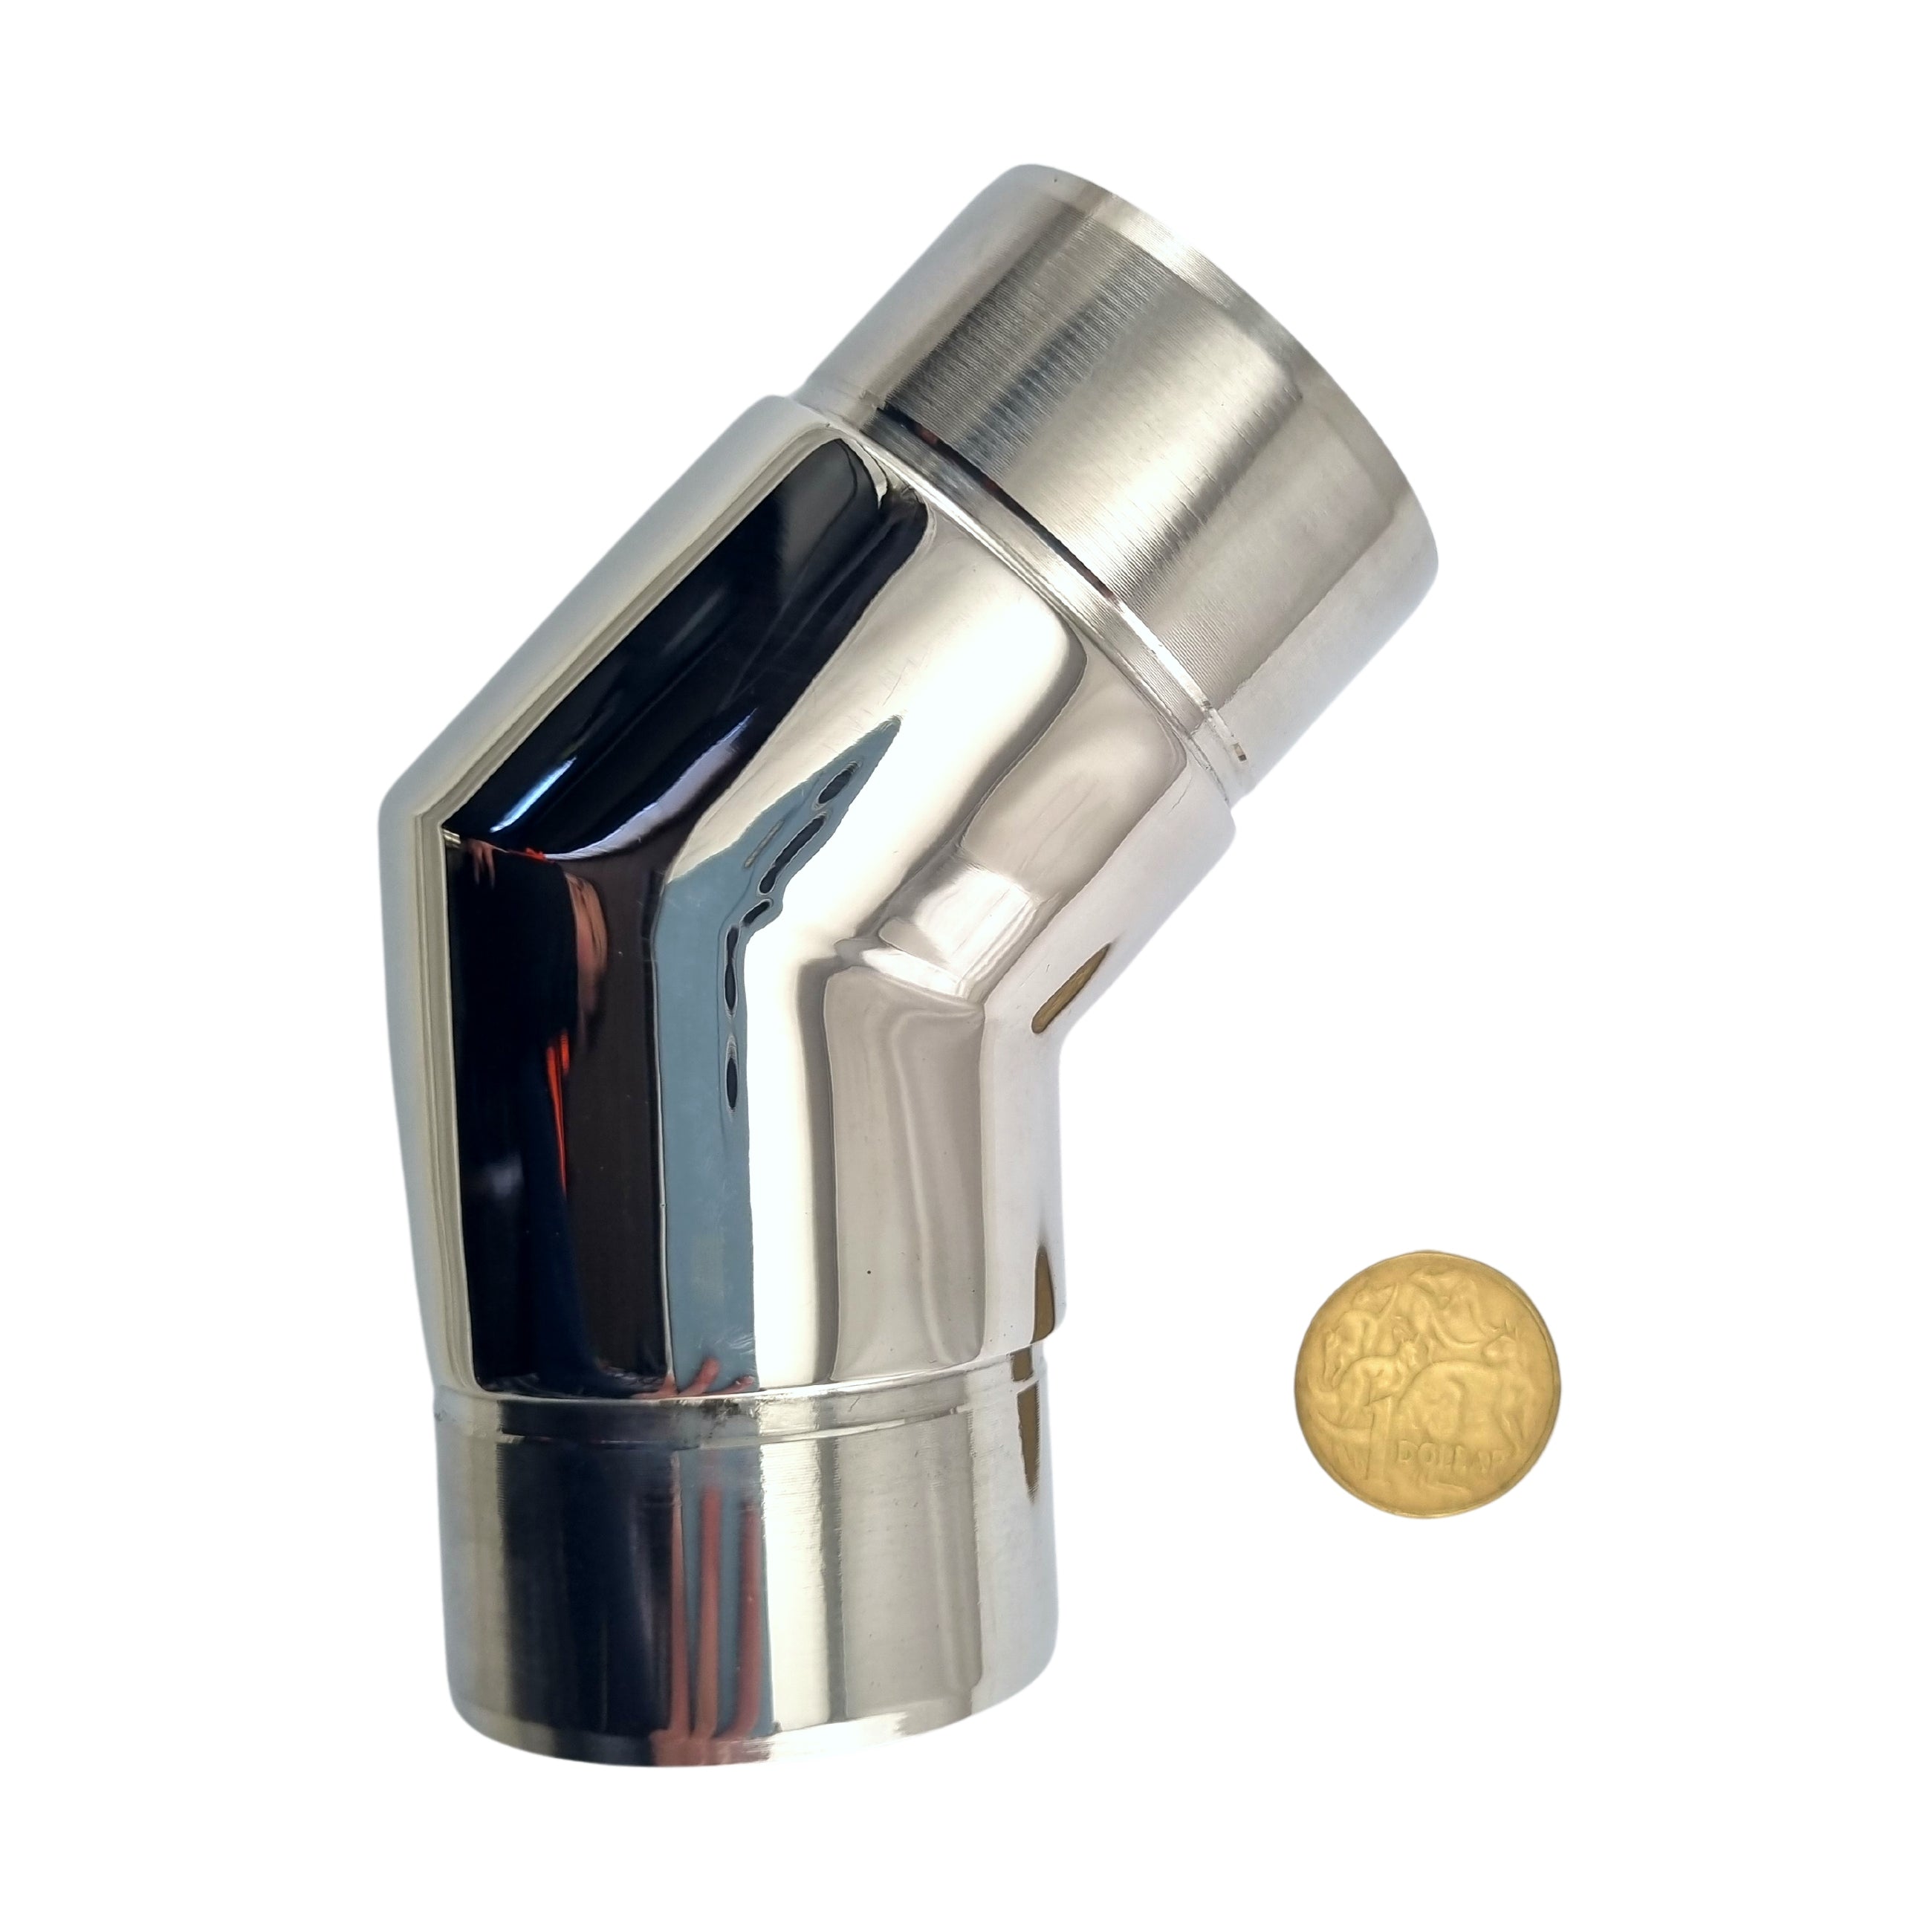 Stainless Steel 135 Degrees (135°) Tube Connector Rail Fitting. Australia wide shipping. Shop: chain.com.au